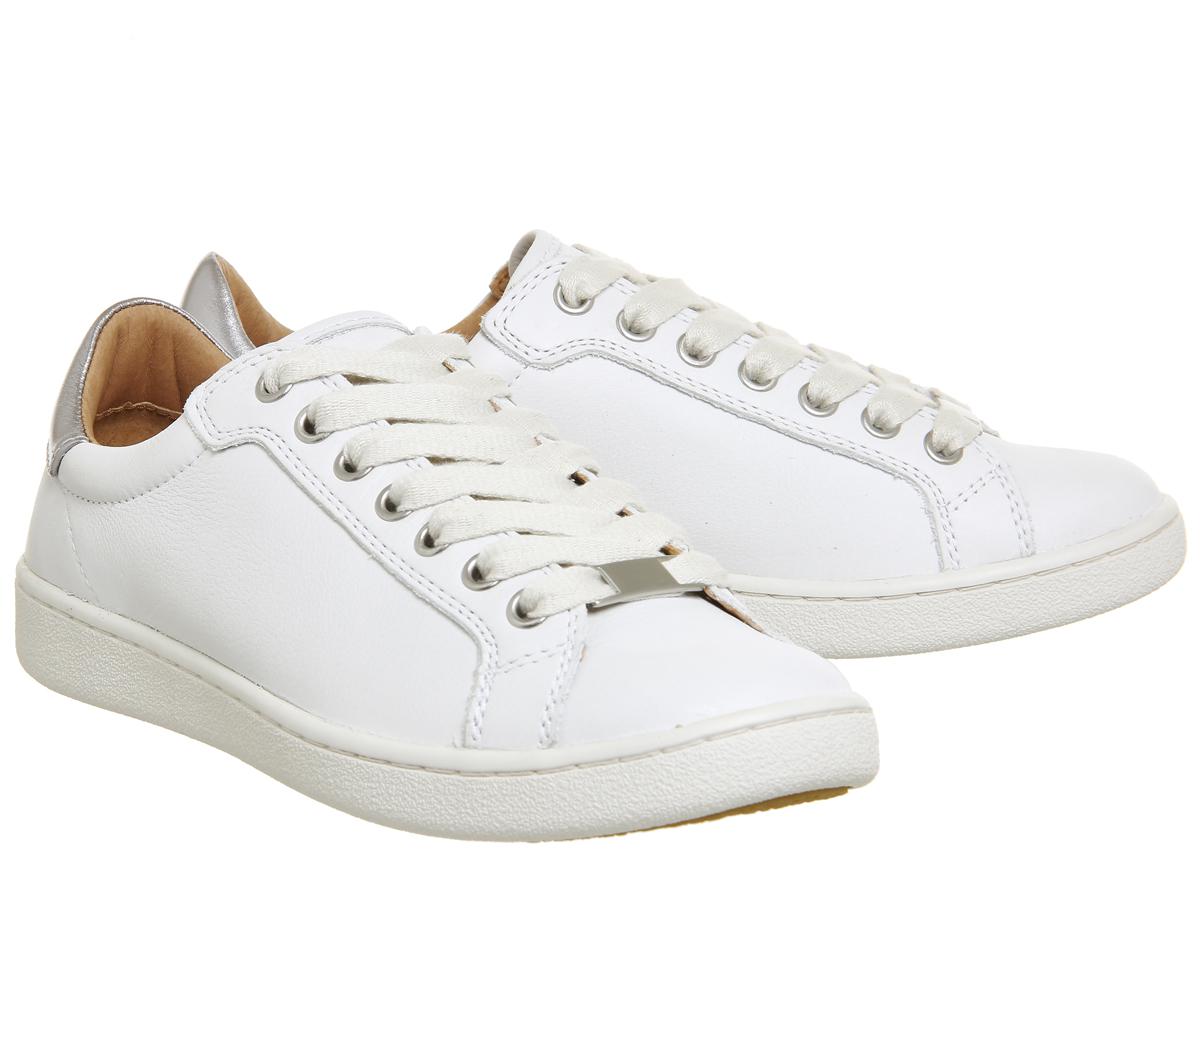 UGG Leather Milo Sneakers in White - Lyst